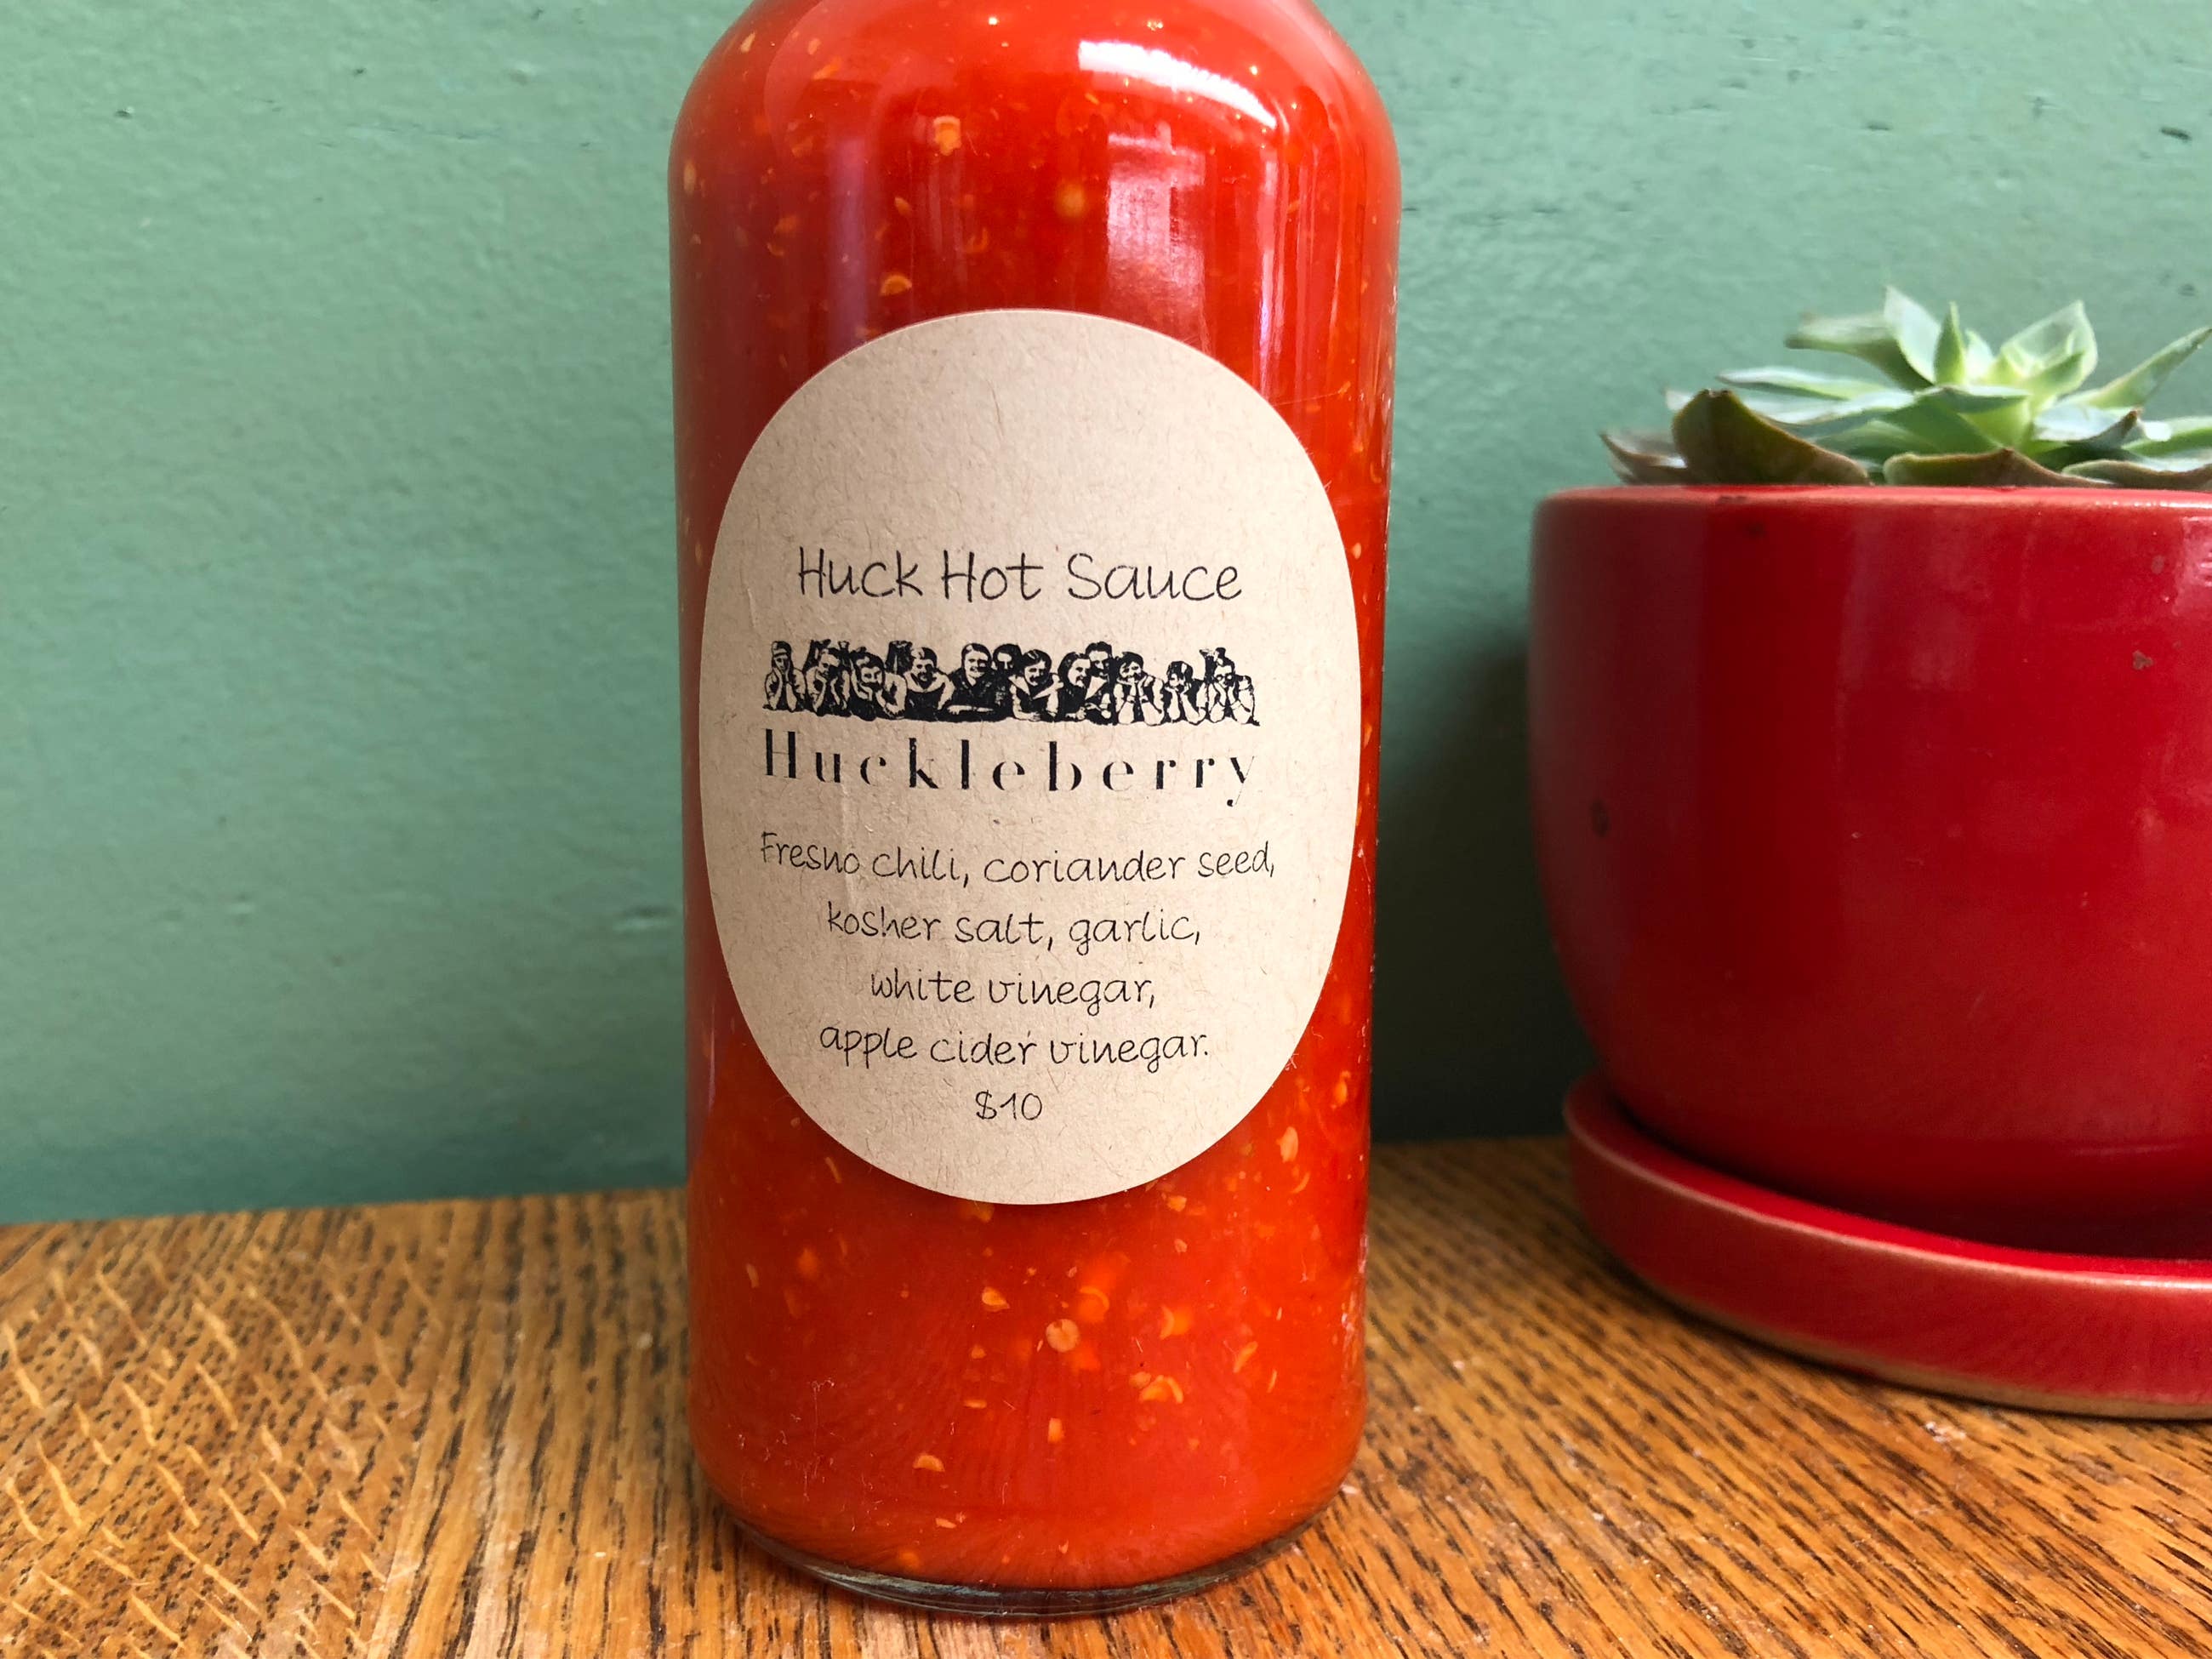 Huck Hot Sauce at Huckleberry Bakery and Cafe